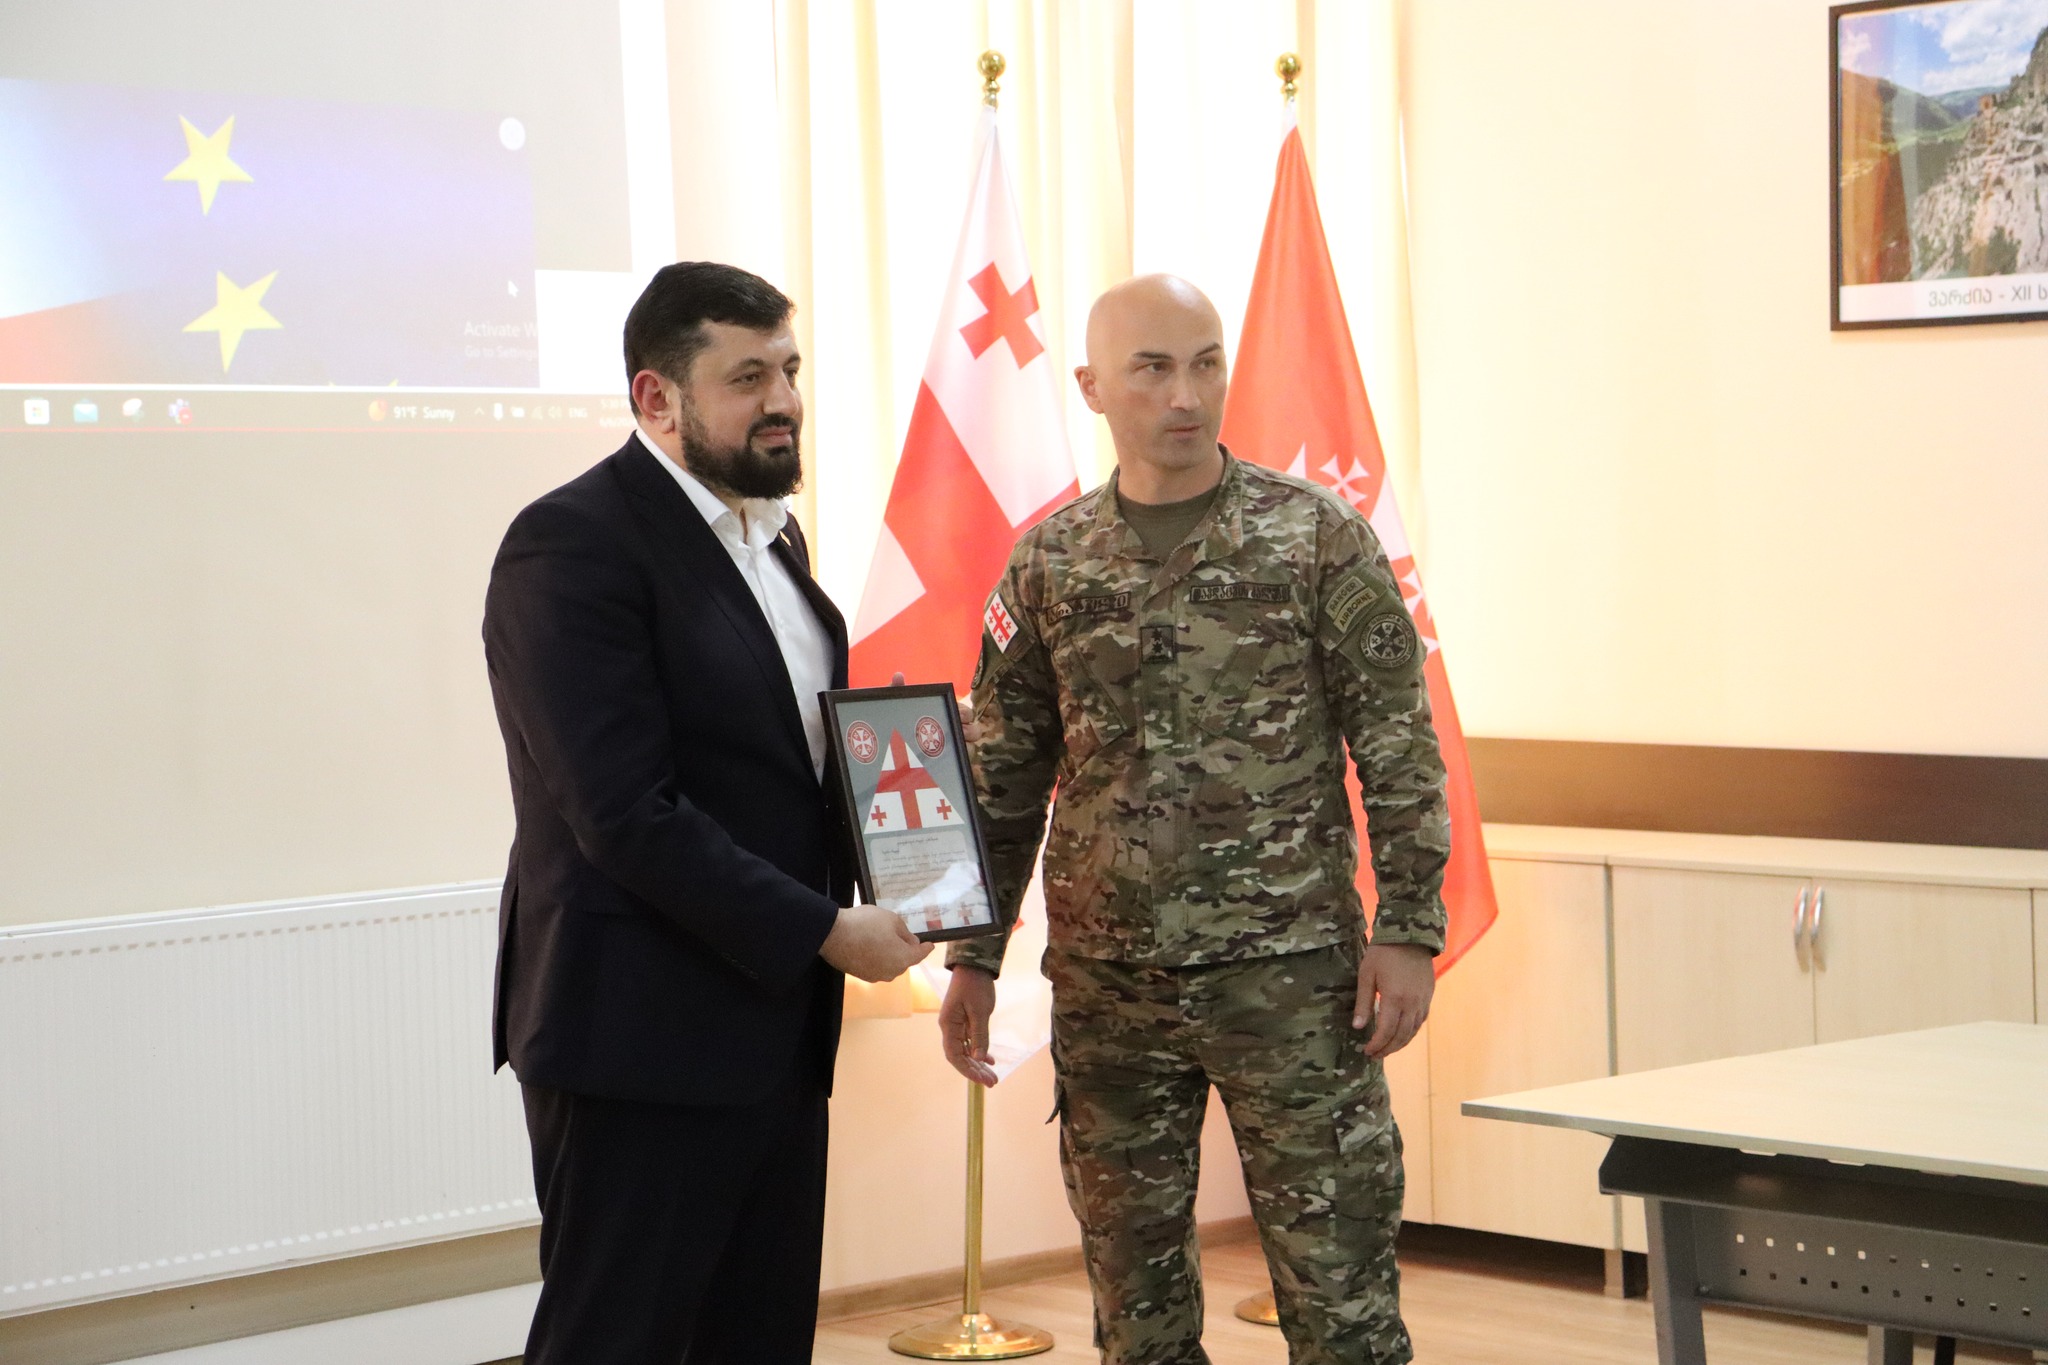 The Head of the Anti-Corruption Bureau, Razden Kuprashvili, conducted an interactive meeting for the employees of the Ministry of Defense and other state agencies